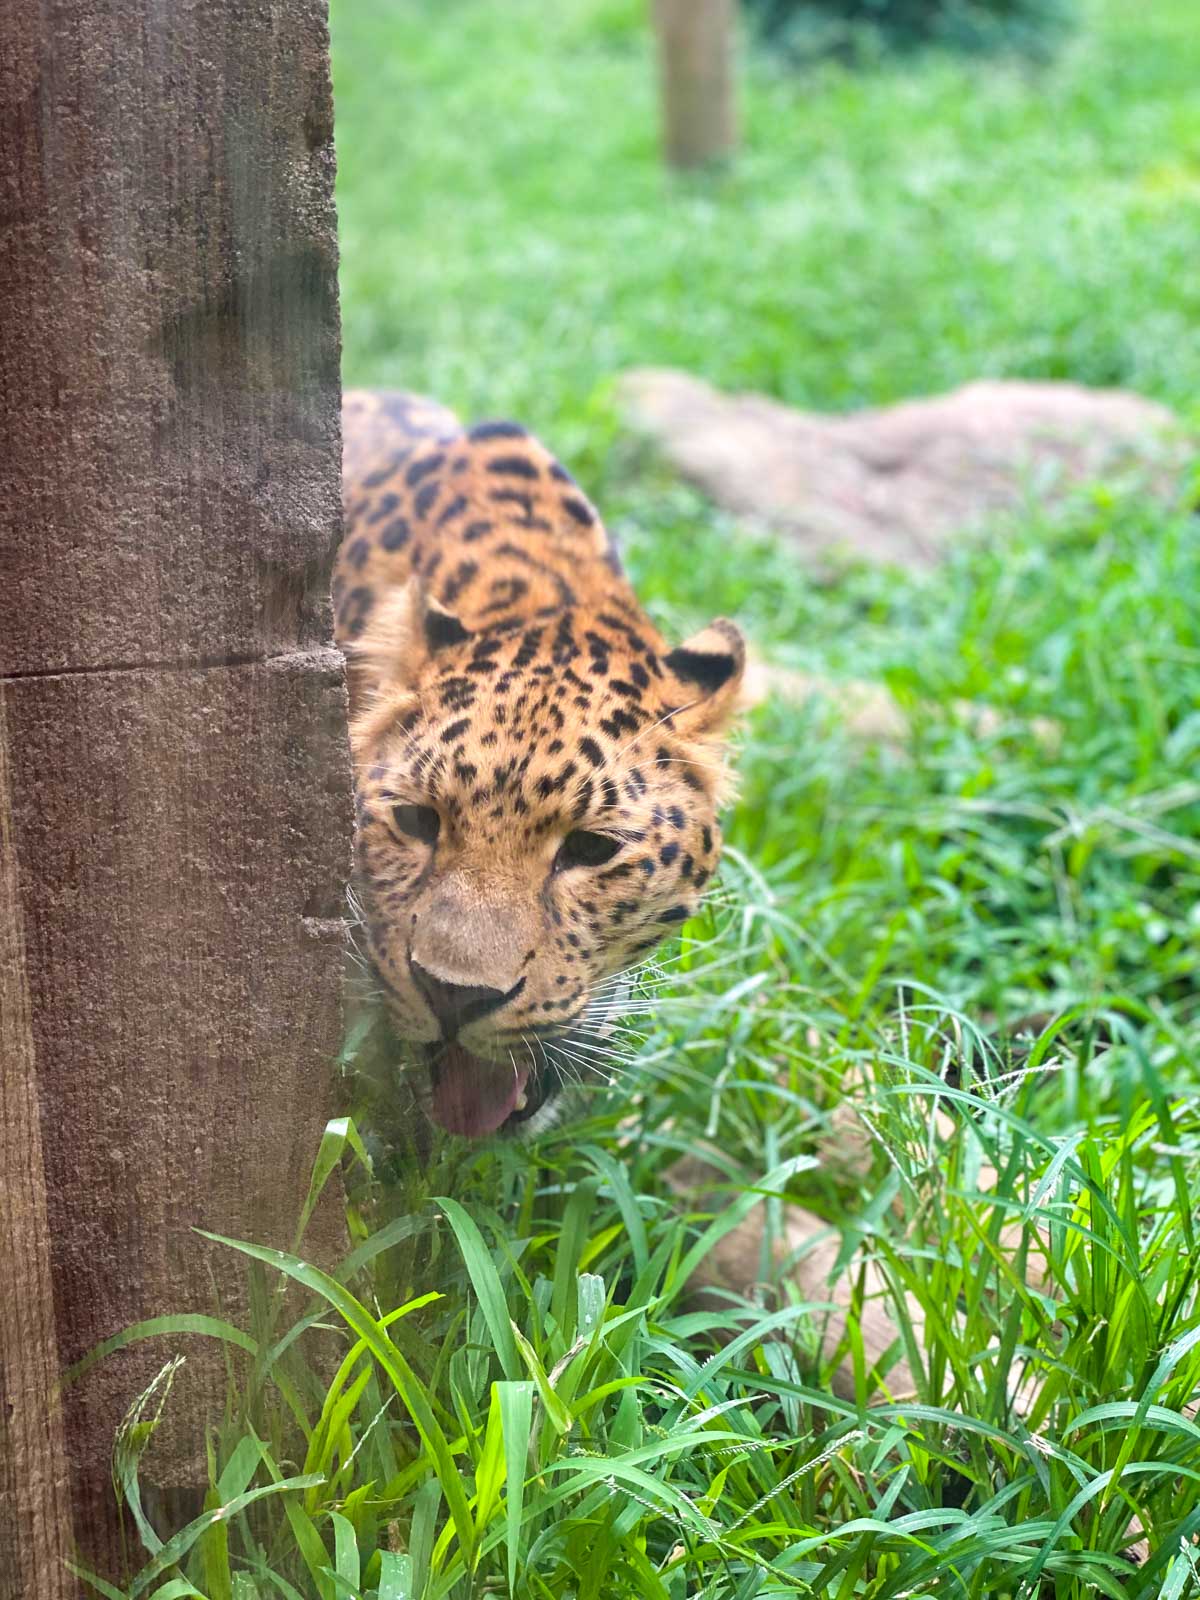 An upclose shot of the leopard shows how close you can get to the animals at the Greenville Zoo.